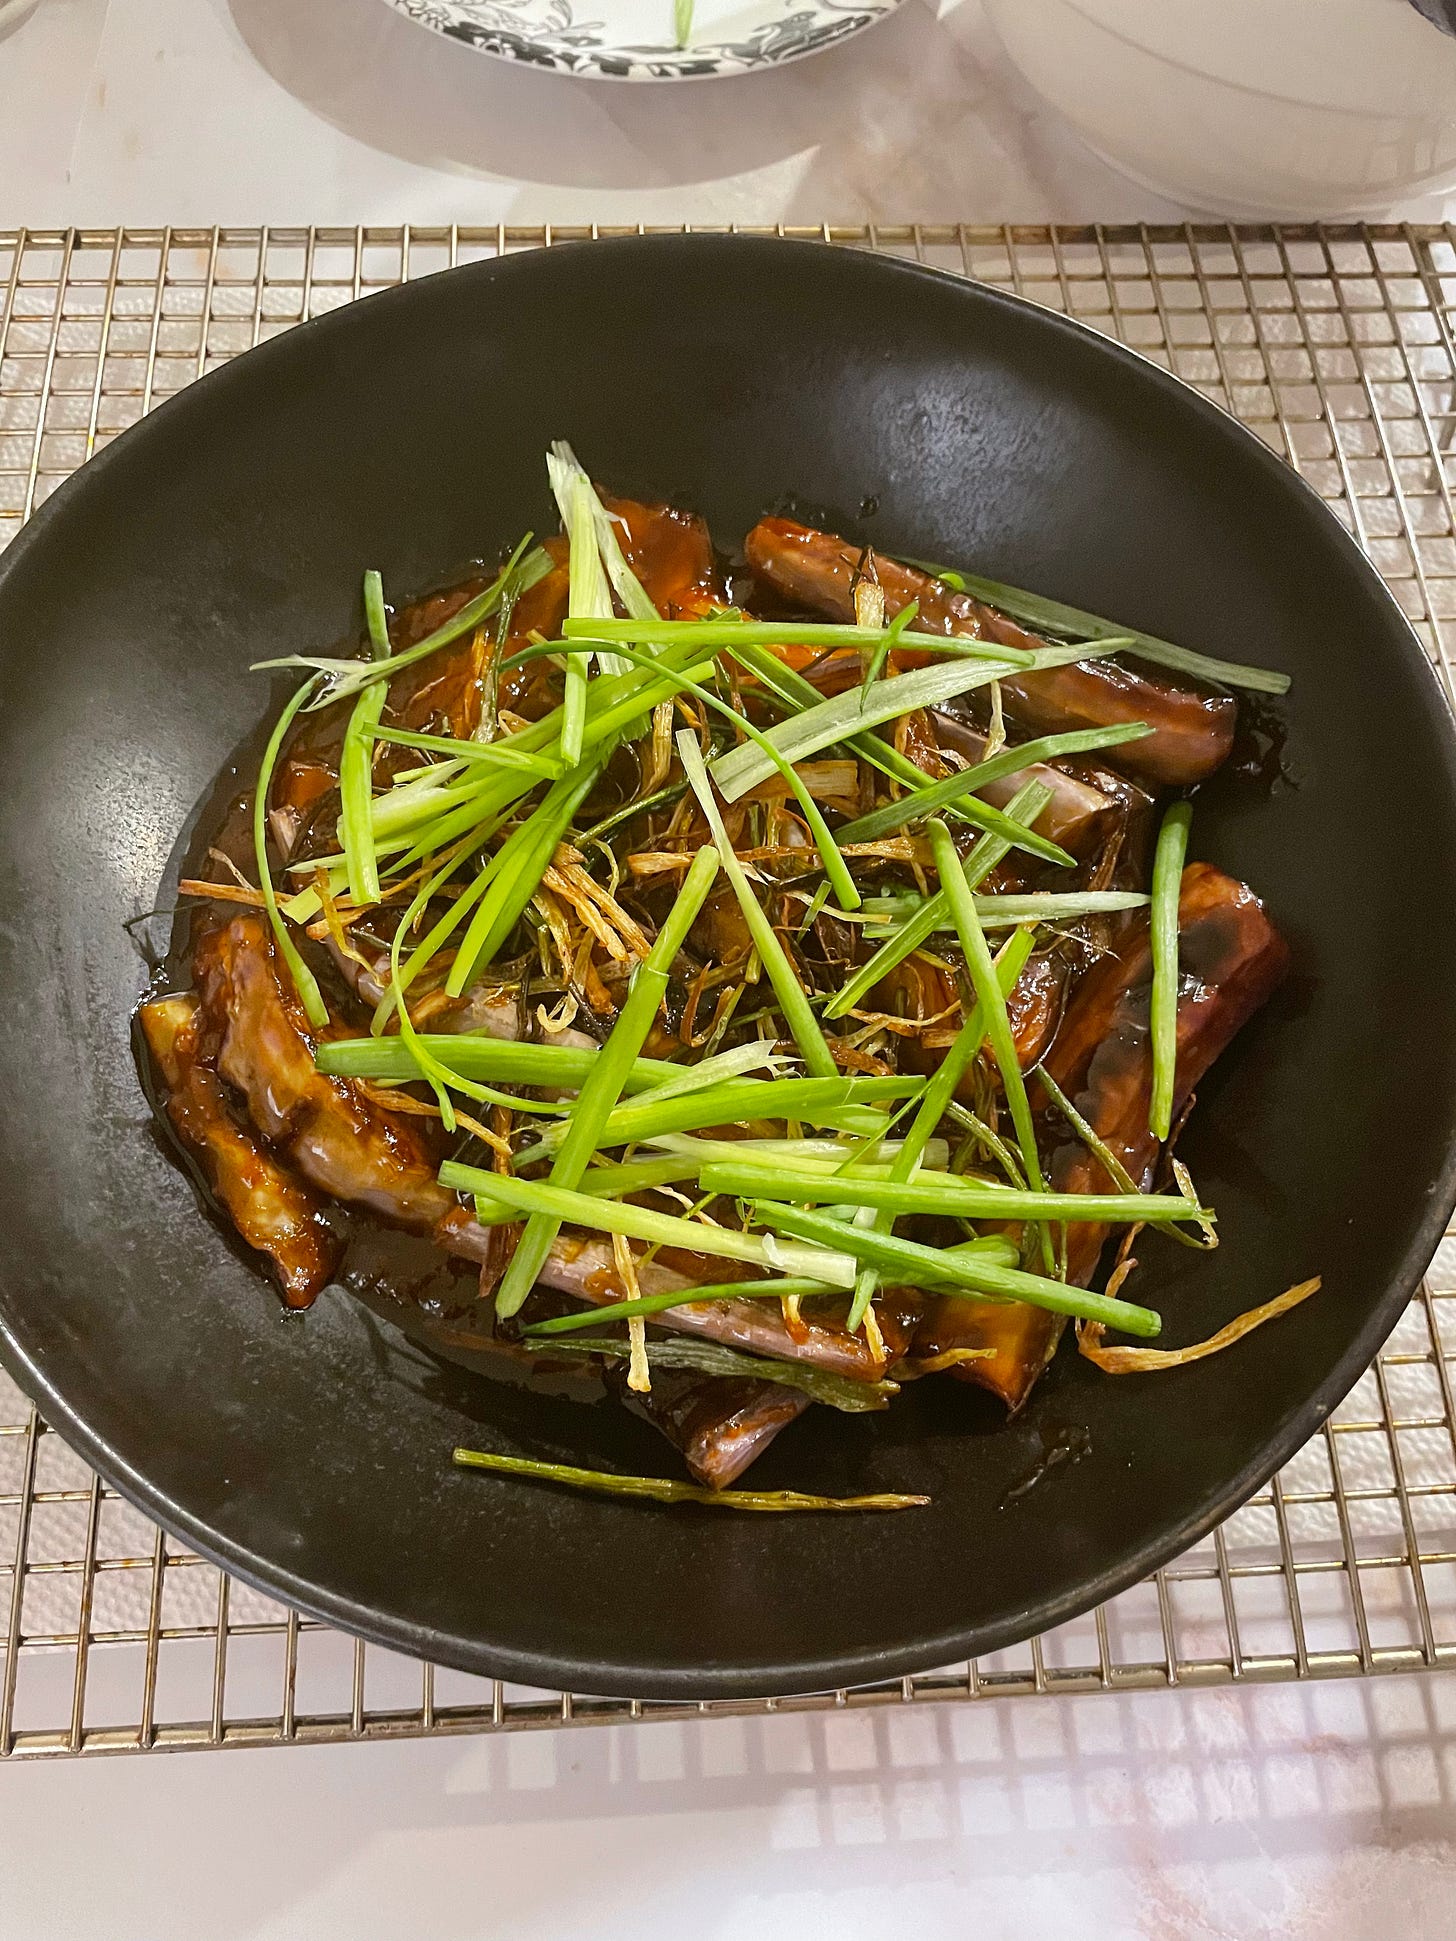 gochujang-glazed eggplant with scallions in a bowl